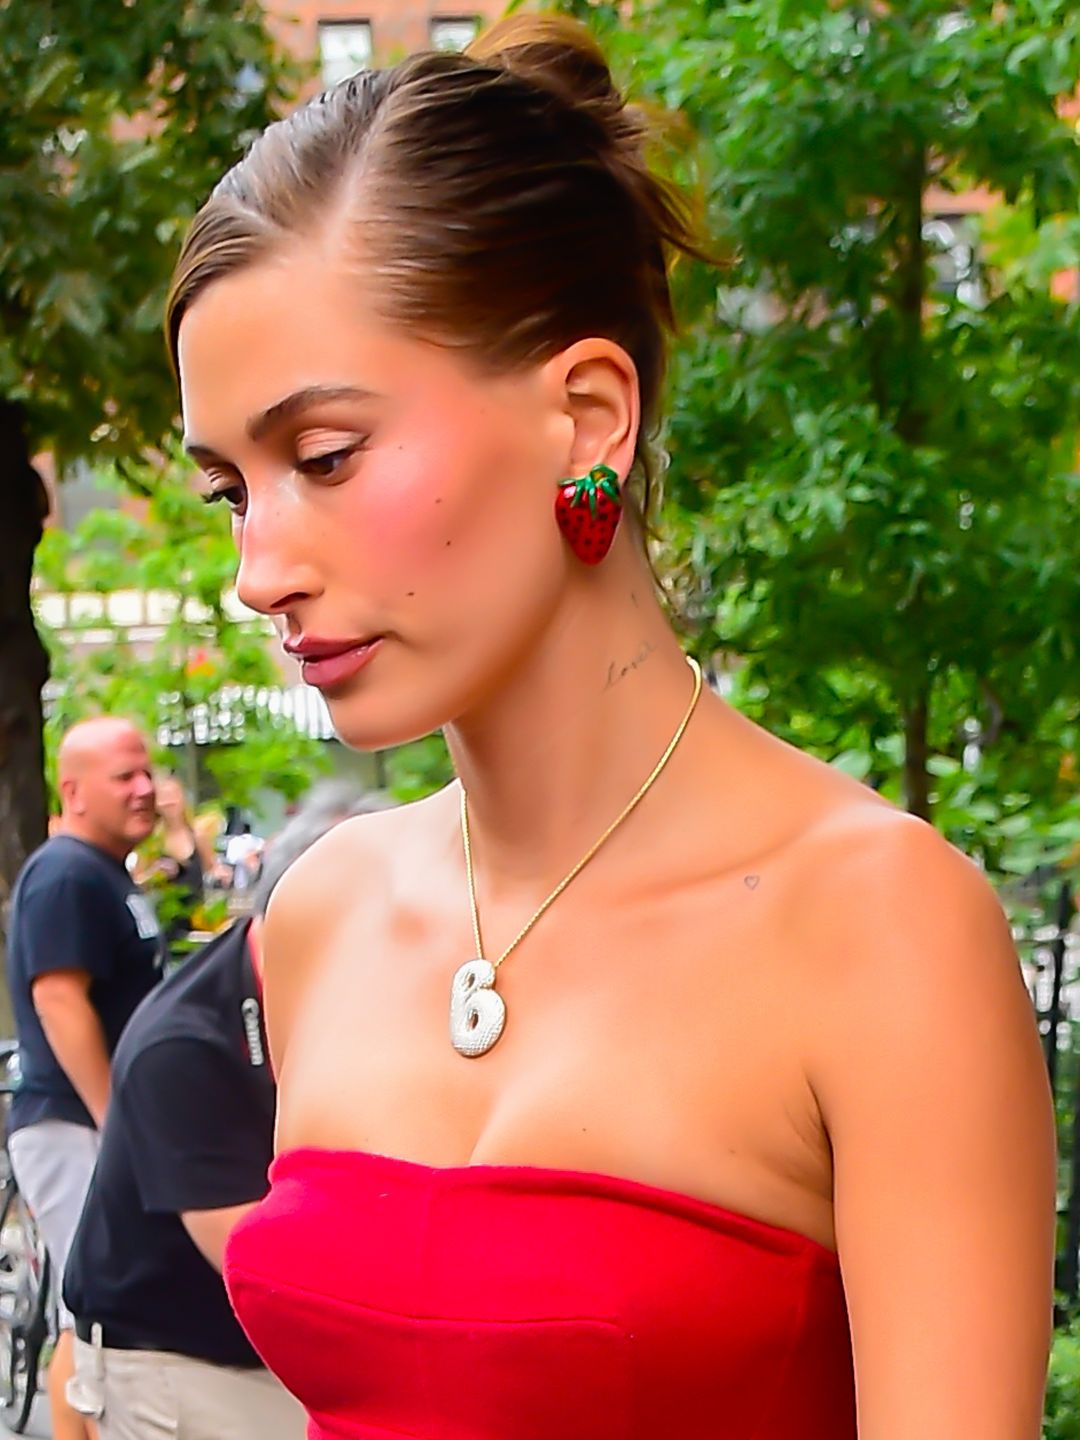 Hailey wore strawberry earrings to match her new hair colour